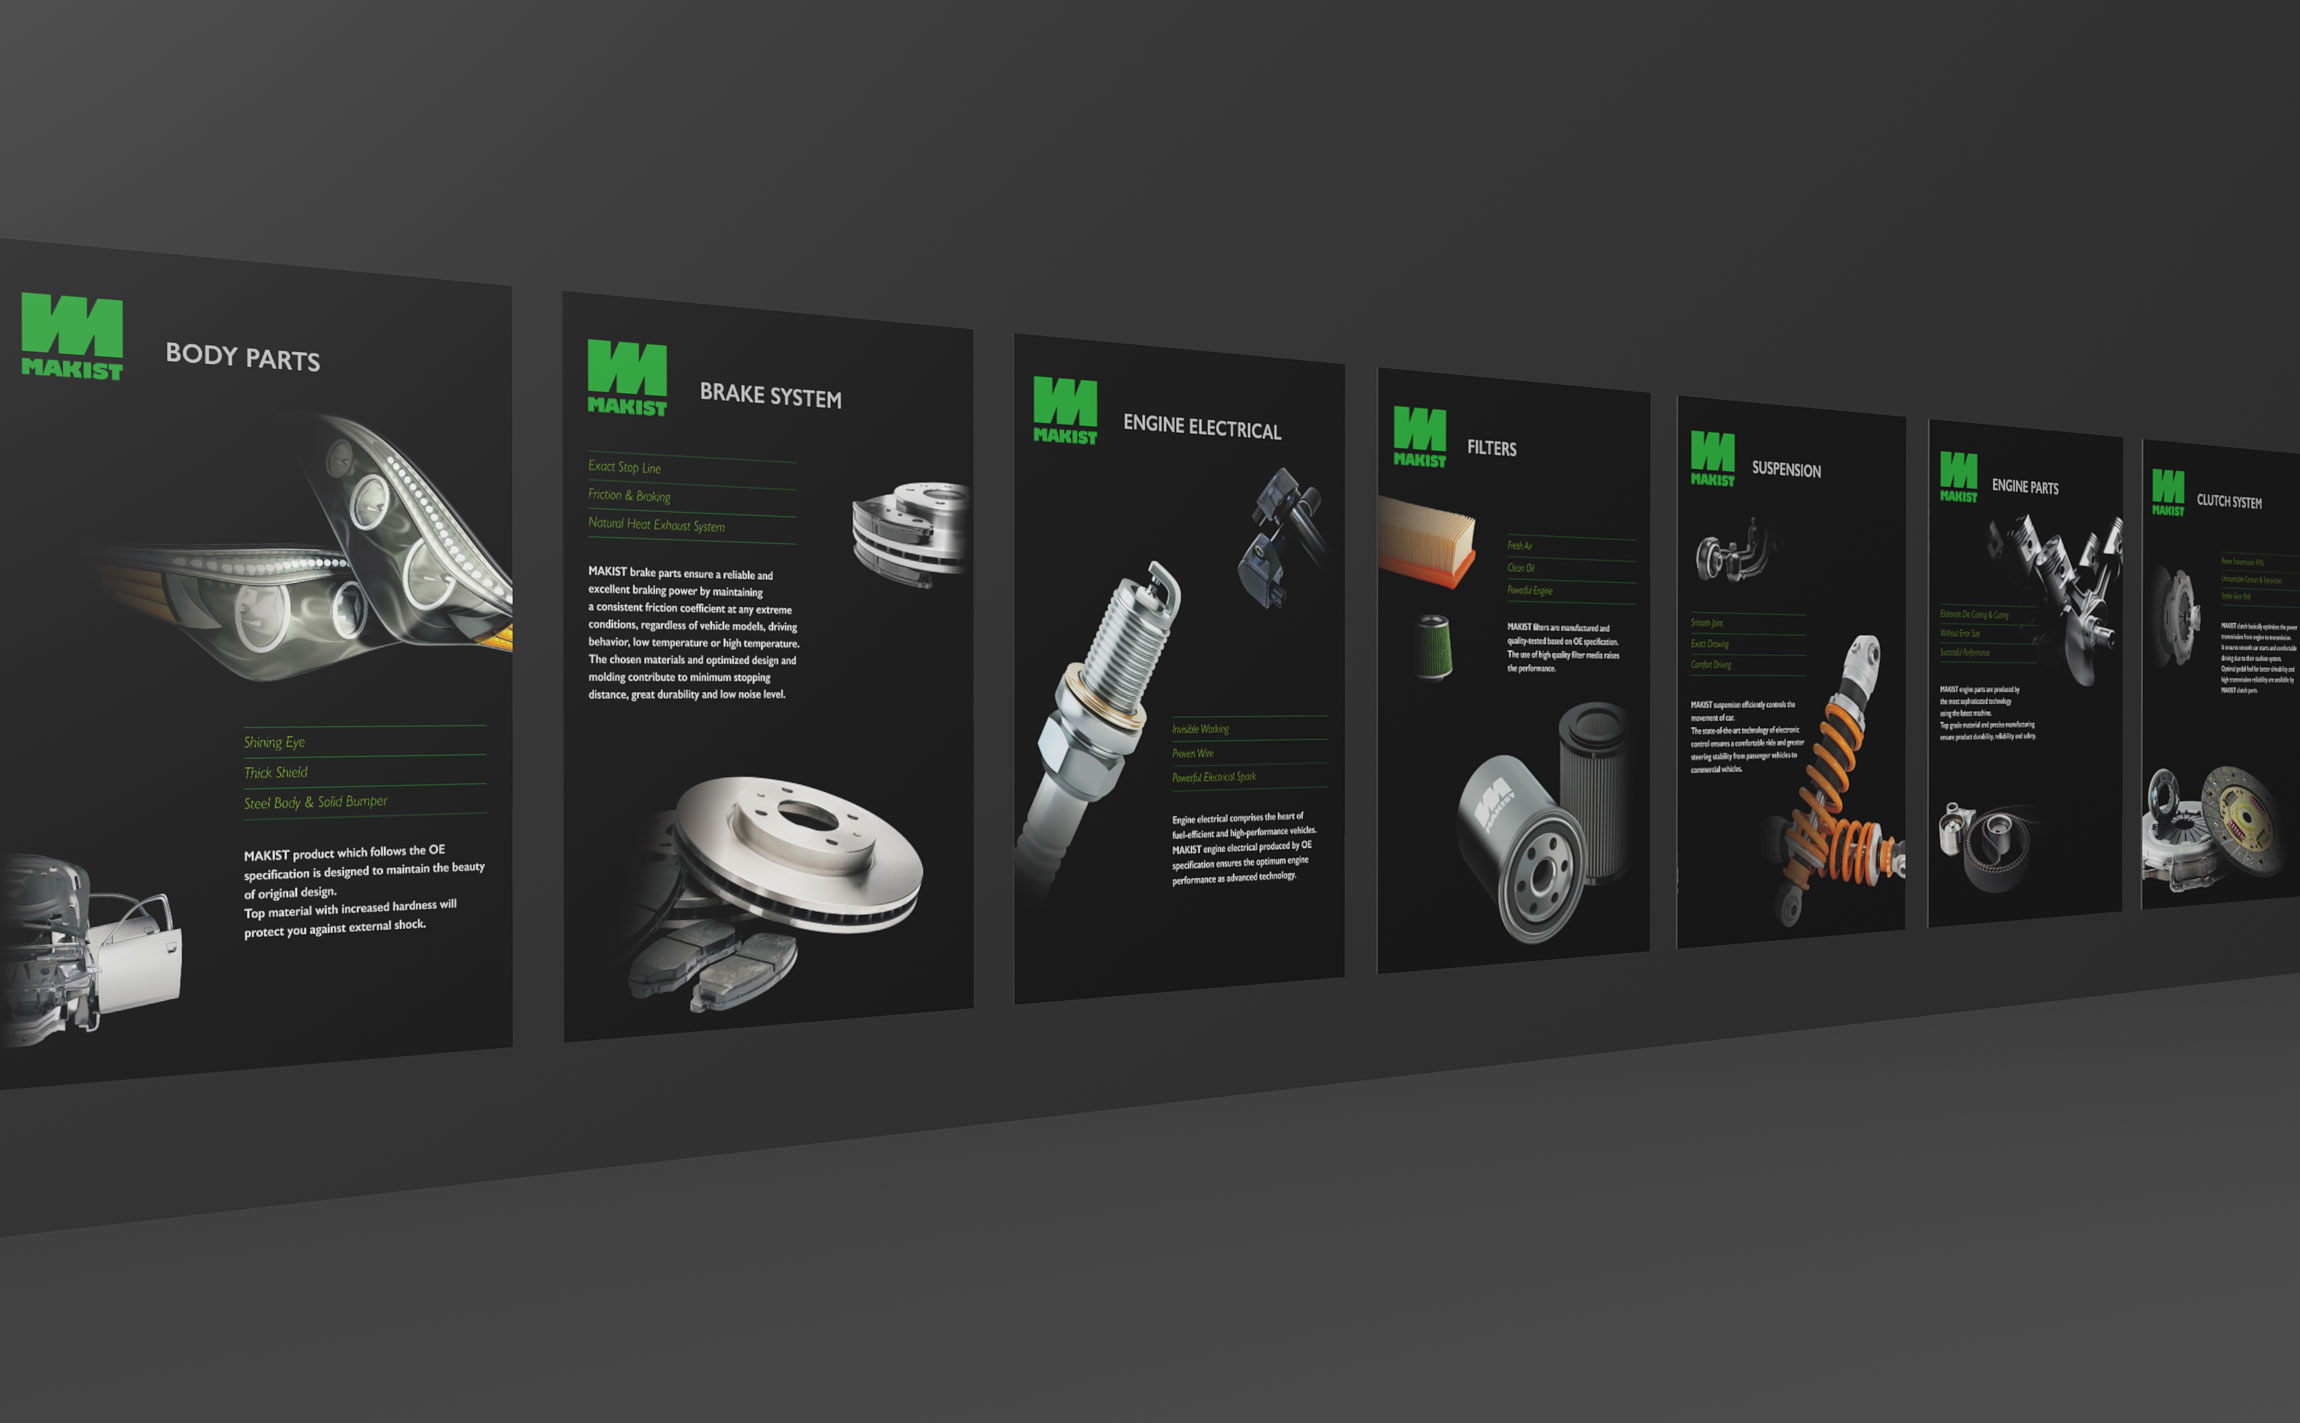 Exbition Display for a Autoparts Company